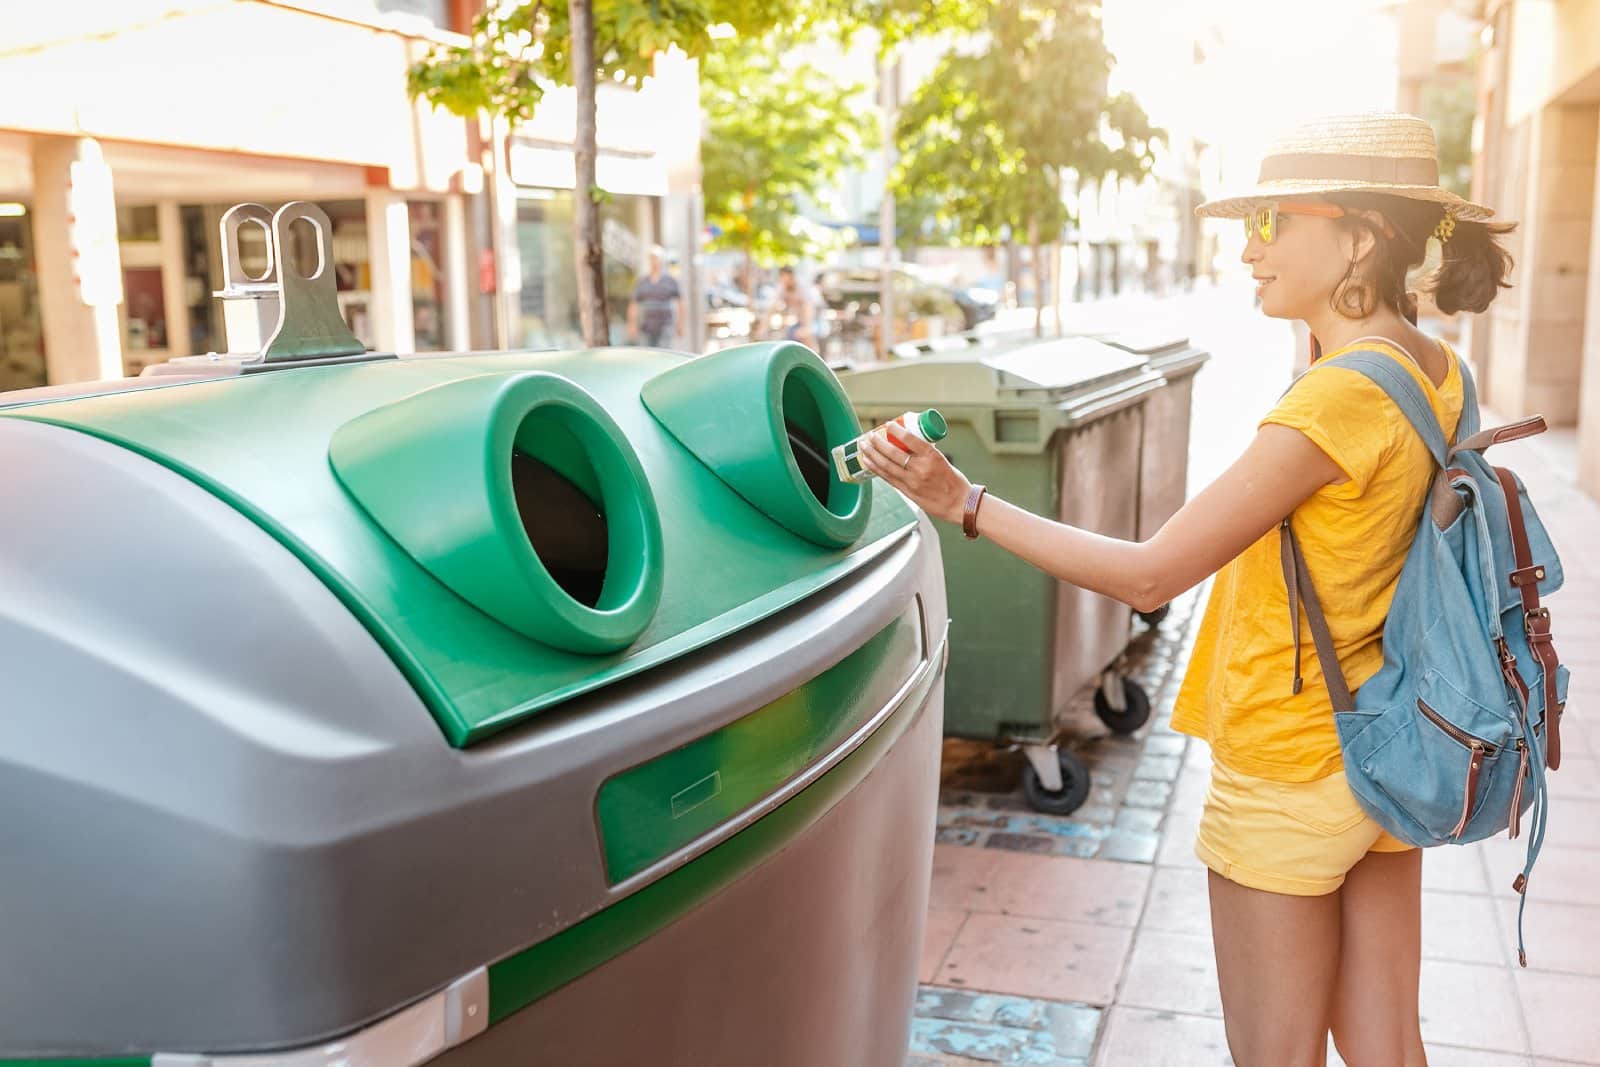 <p class="wp-caption-text">Image Credit: Shutterstock / frantic00</p>  <p><span>Even with the best intentions, some waste may be inevitable. Properly managing this waste is crucial. Familiarize yourself with local recycling and composting options, and ensure that you dispose of any waste according to local guidelines. In areas where recycling facilities are lacking, consider packing out recyclables to dispose of them properly later.</span></p>